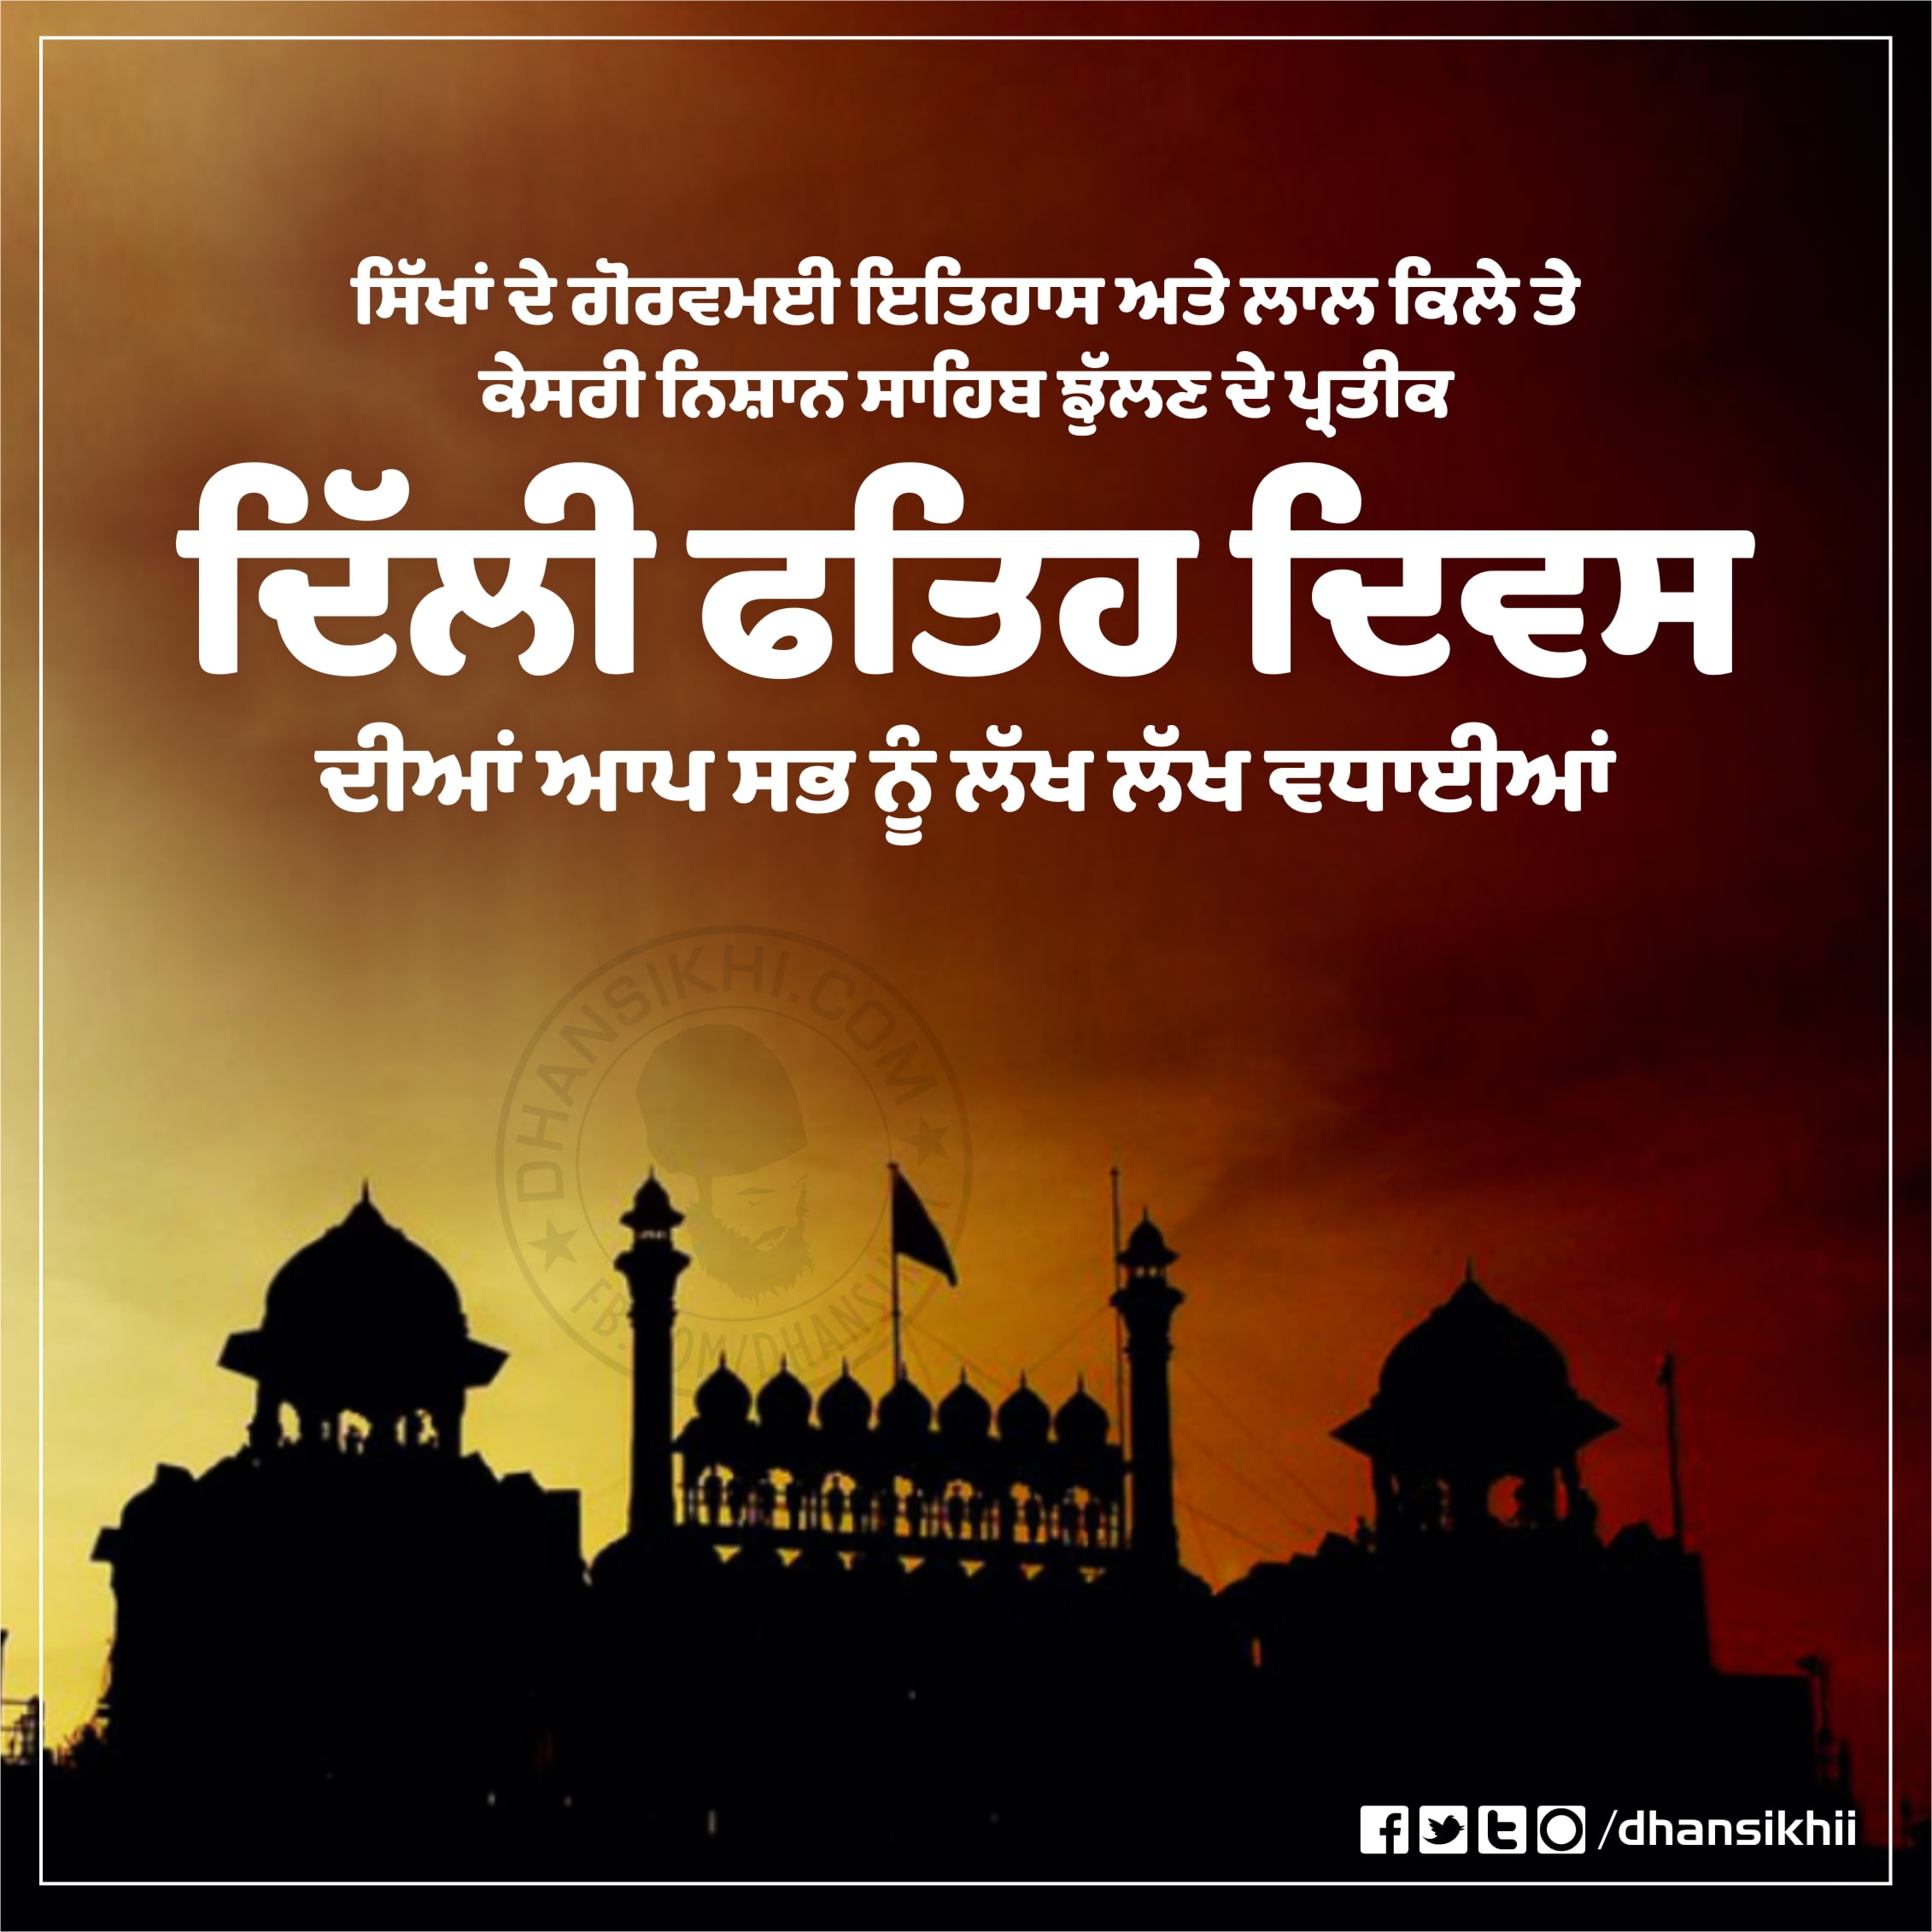 Delhi Fateh Diwas - The Sikhs attacked the Red Fort on 11th March 1783 and hoisted the Nishan Sahib.